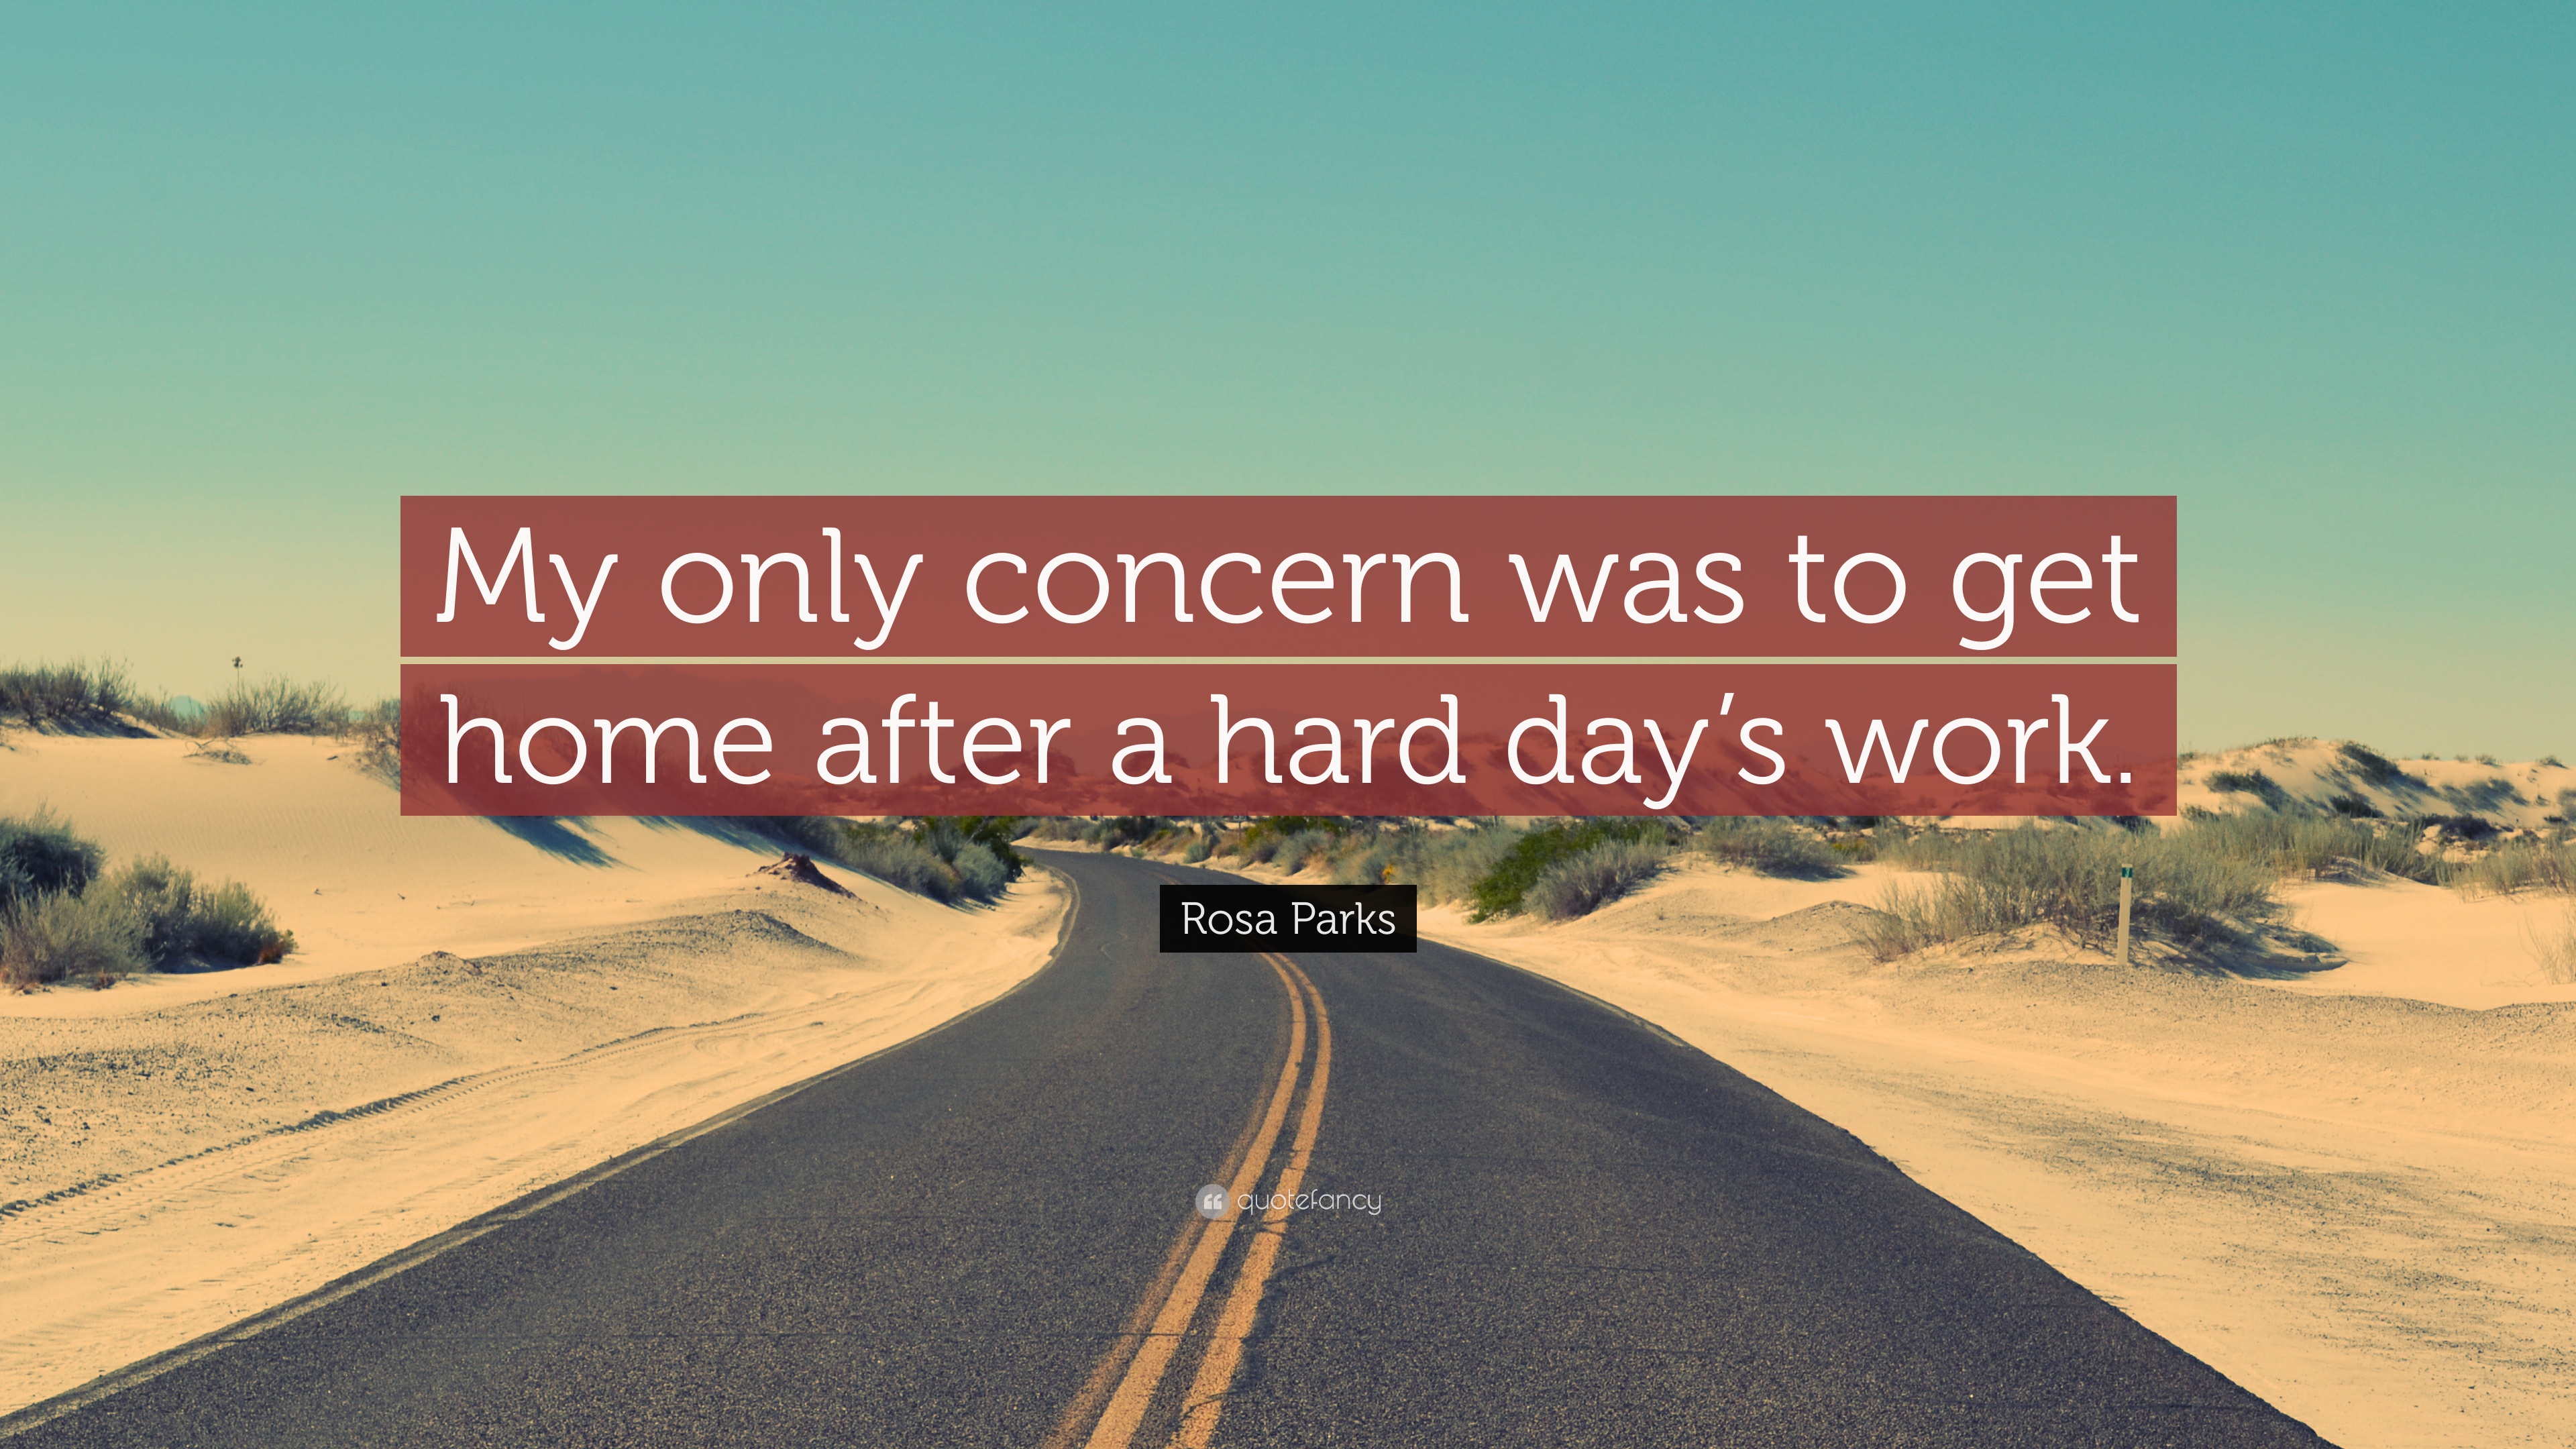 Rosa Parks Quote: “My only concern was to get home after a hard